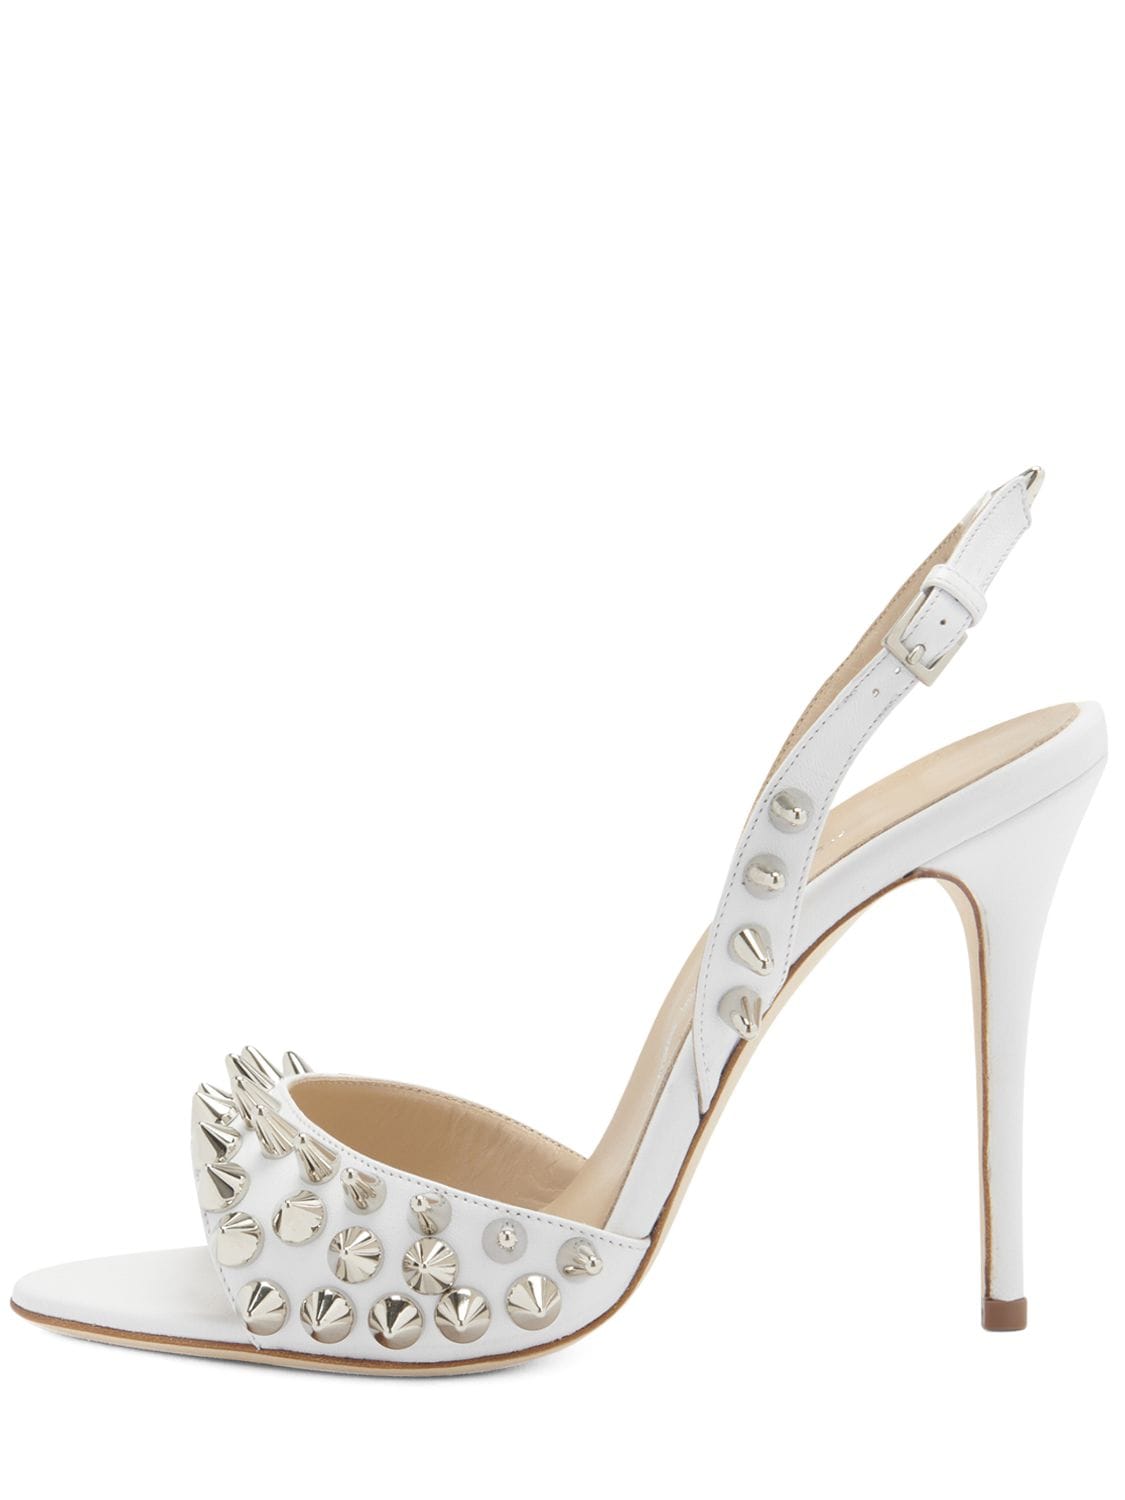 Alessandra Rich 100mm Leather Sandals W/ Spikes In White